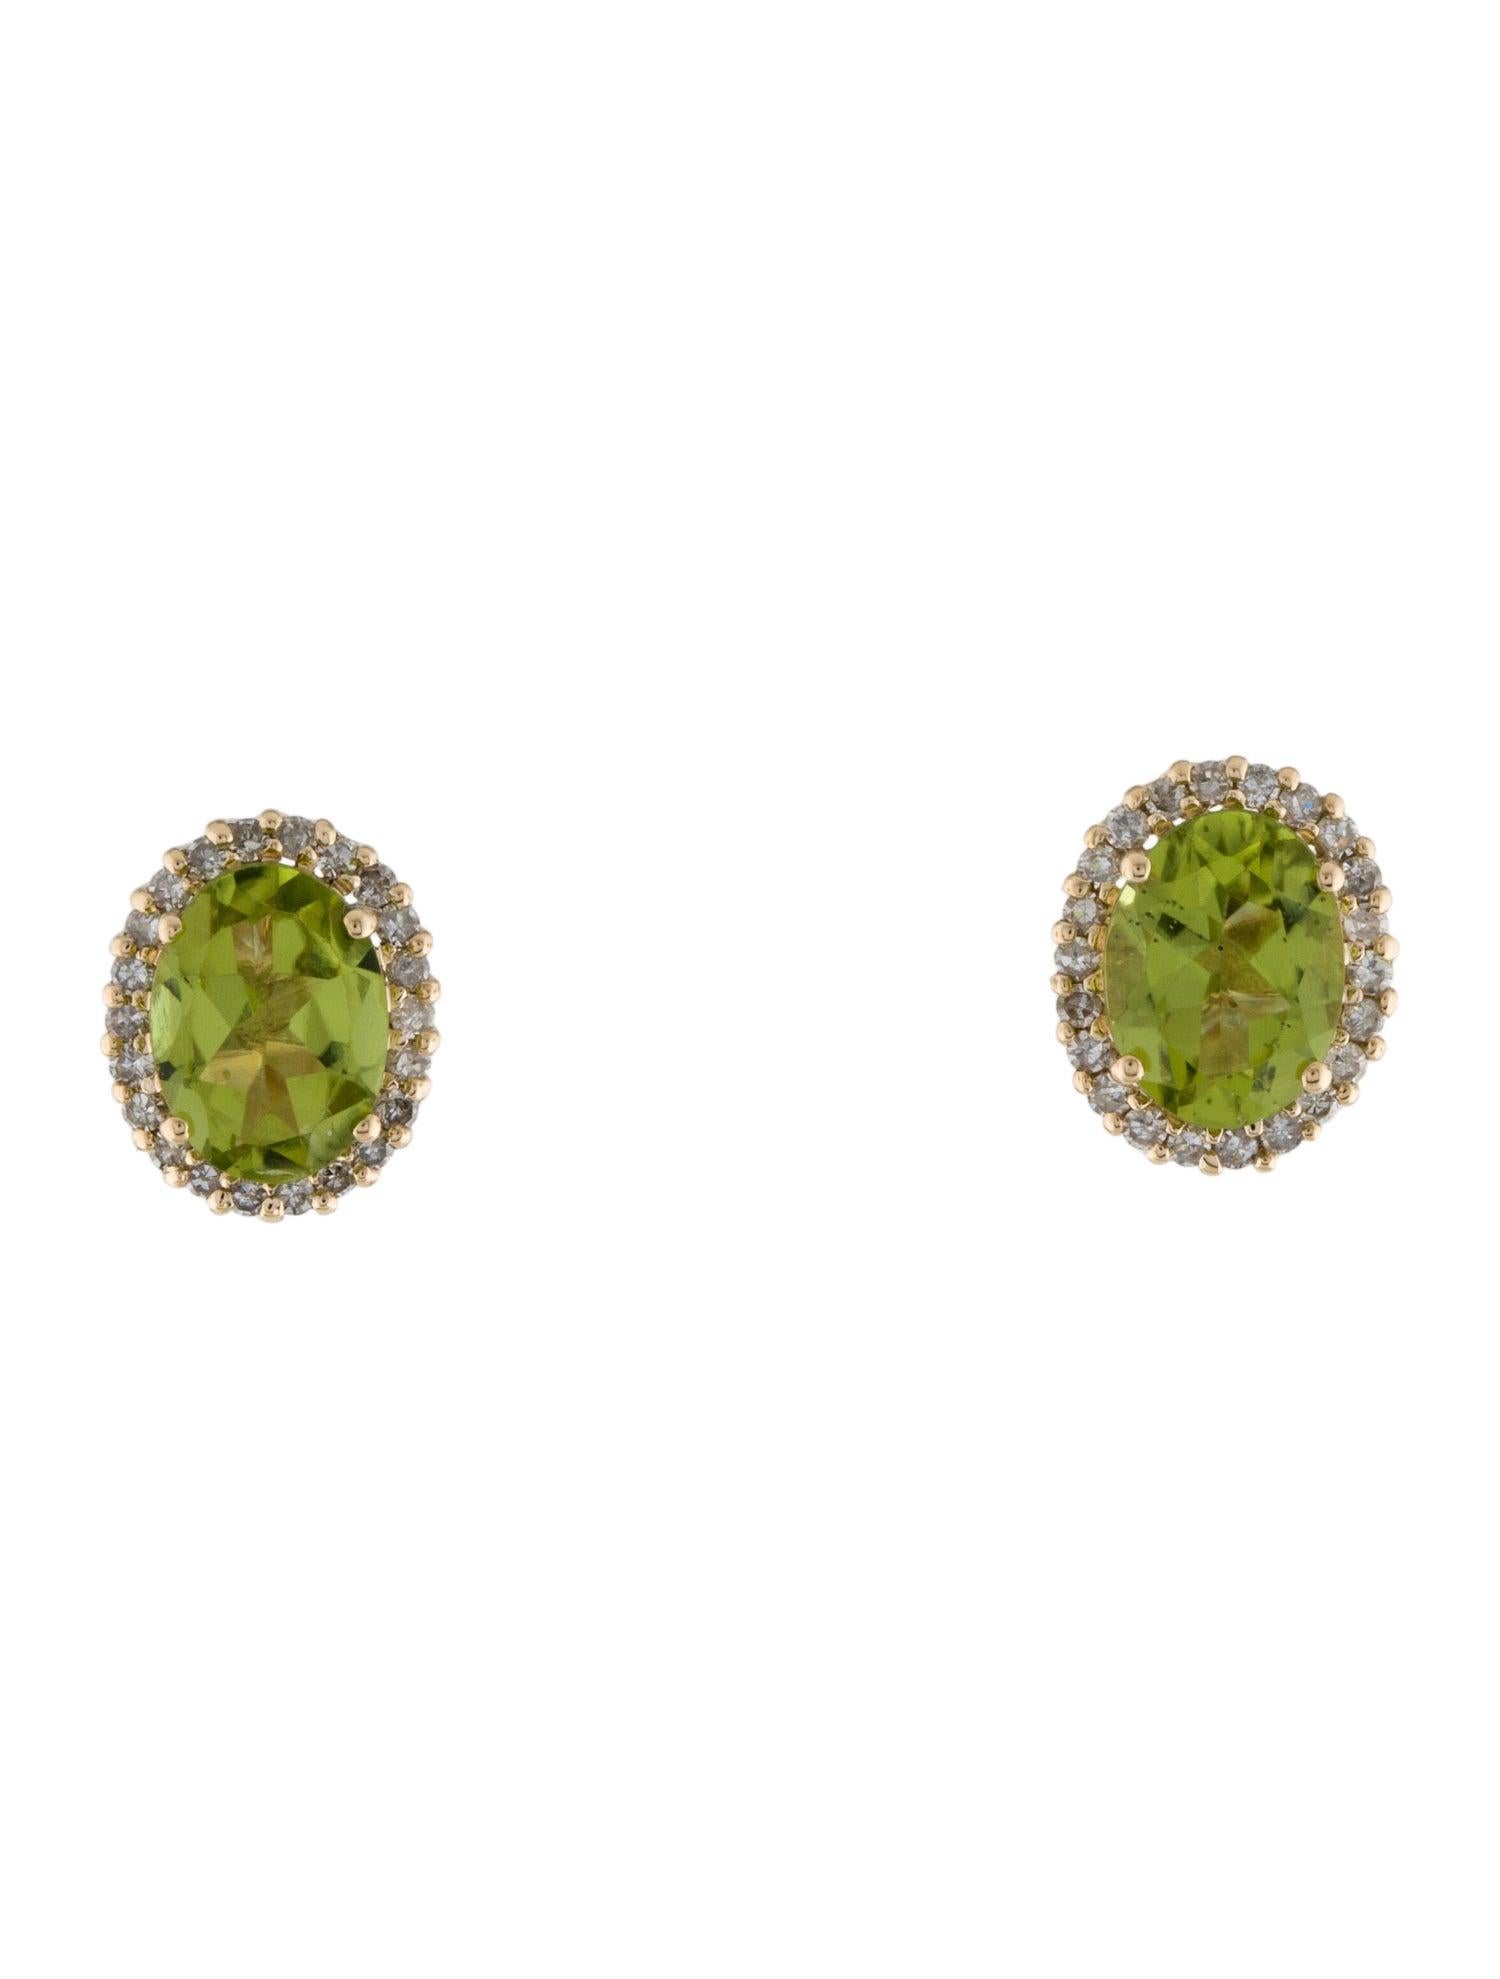 Chic 14K Peridot & 7 Diamond Studs - Elegant Gemstone Jewelry Collection In New Condition For Sale In Holtsville, NY